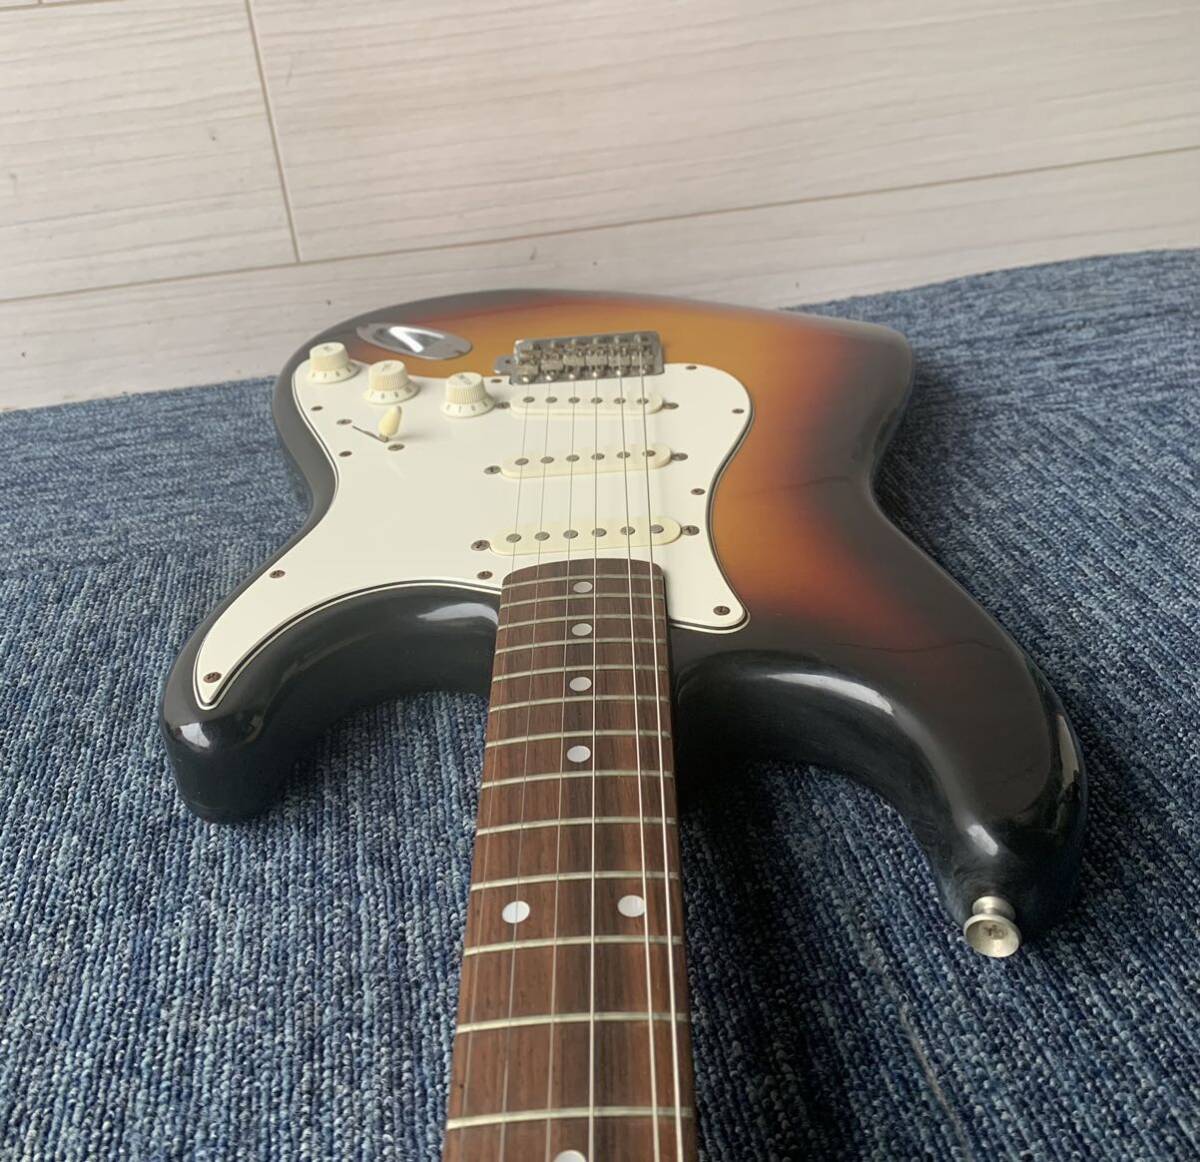 Squier Stratocaster by Fender Japan ストラト エレキギター 動作未確認の画像7